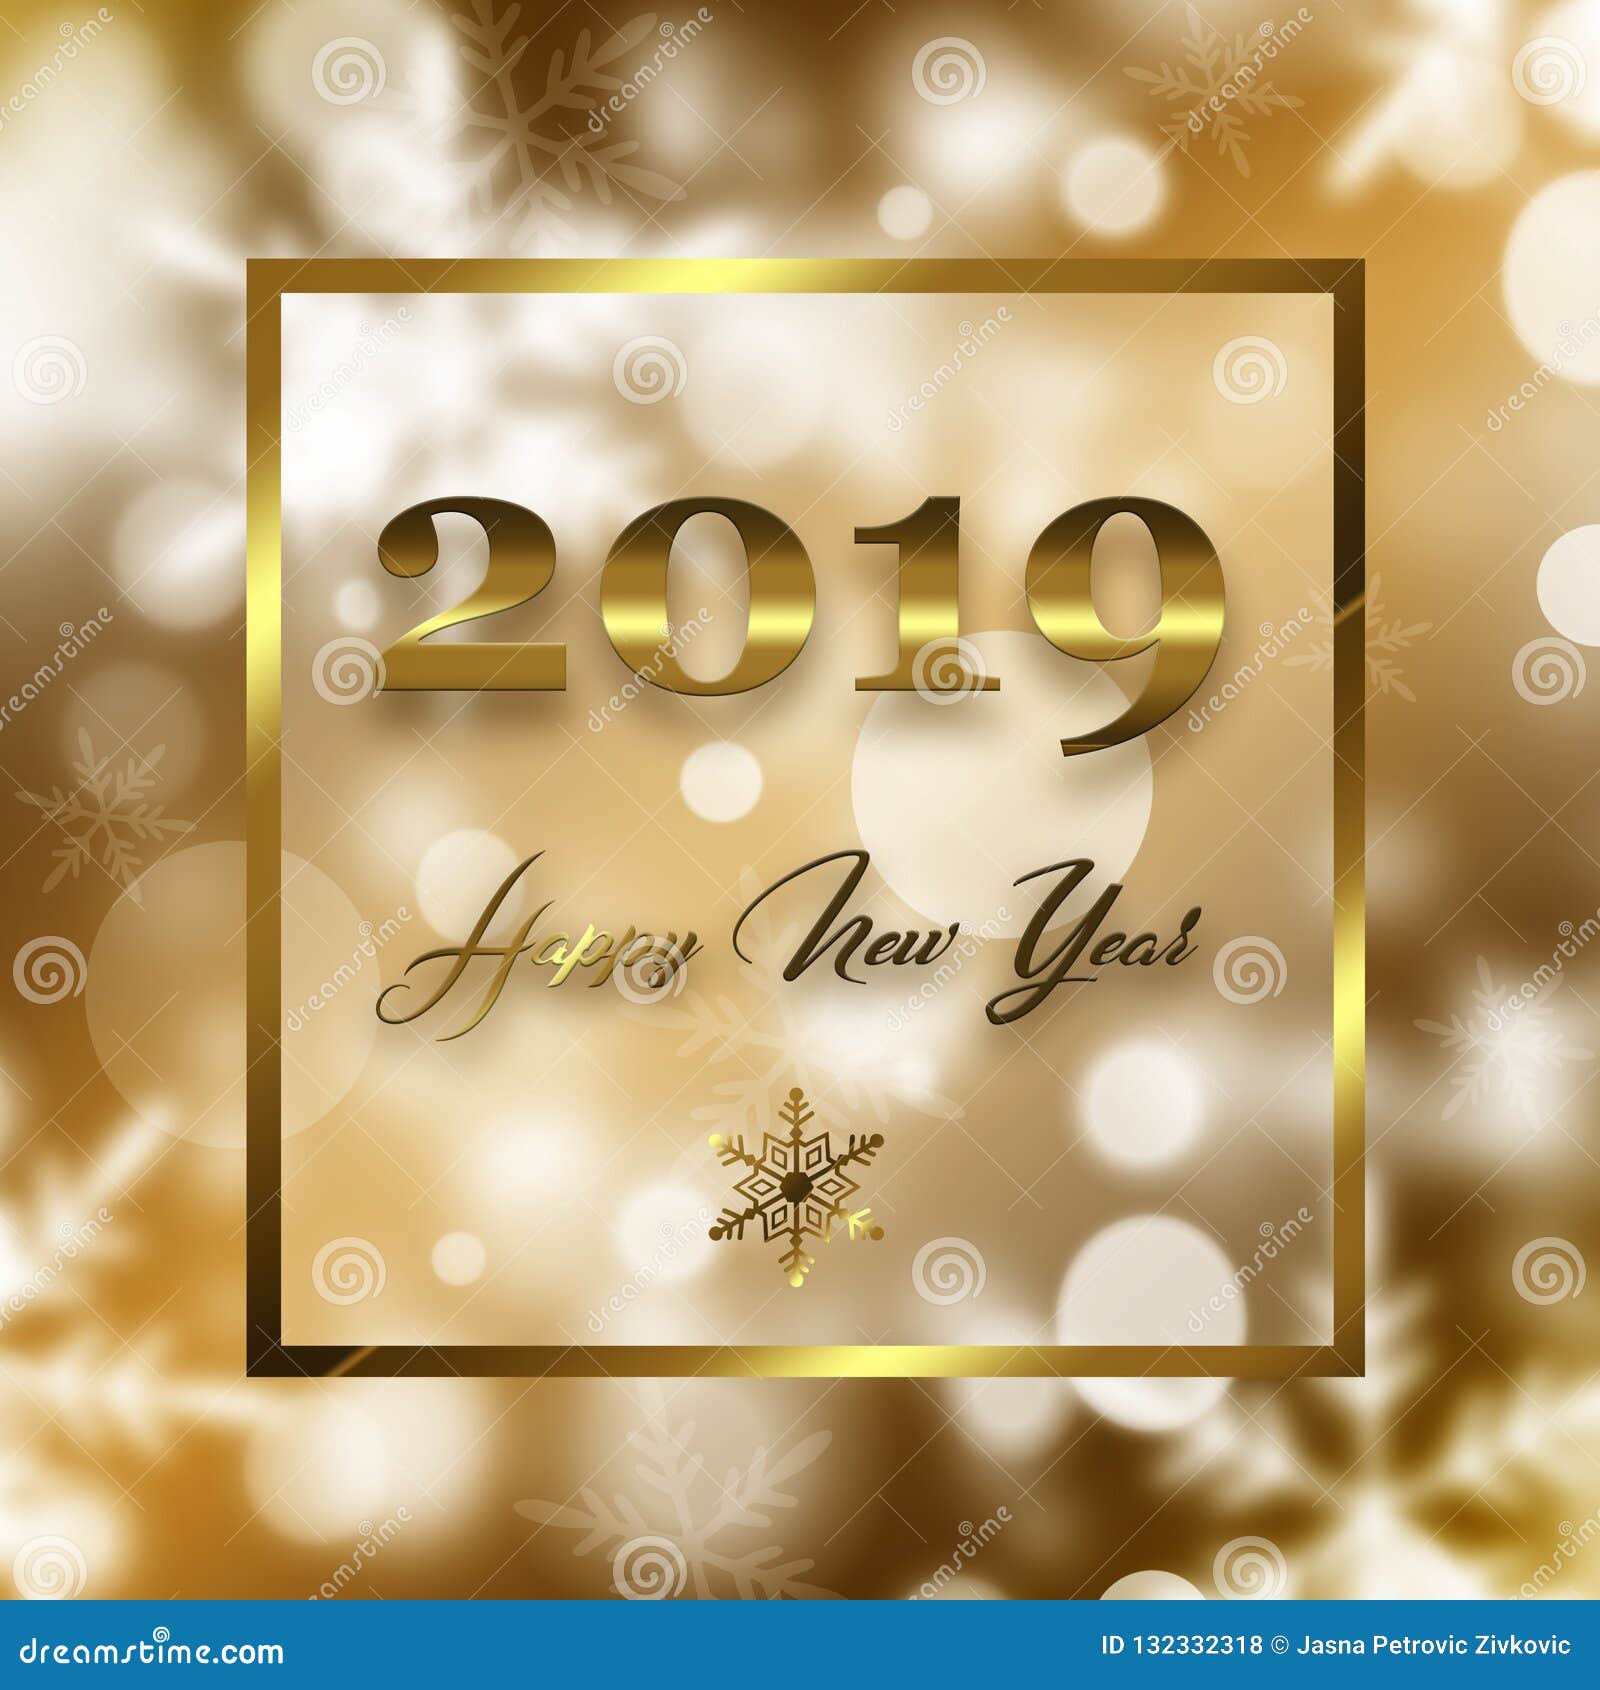 Happy New Year 2019 On Blur Abstract Bokeh Background New Year Greeting Card Banner Stock Illustration Illustration Of Happiness Banner 132332318